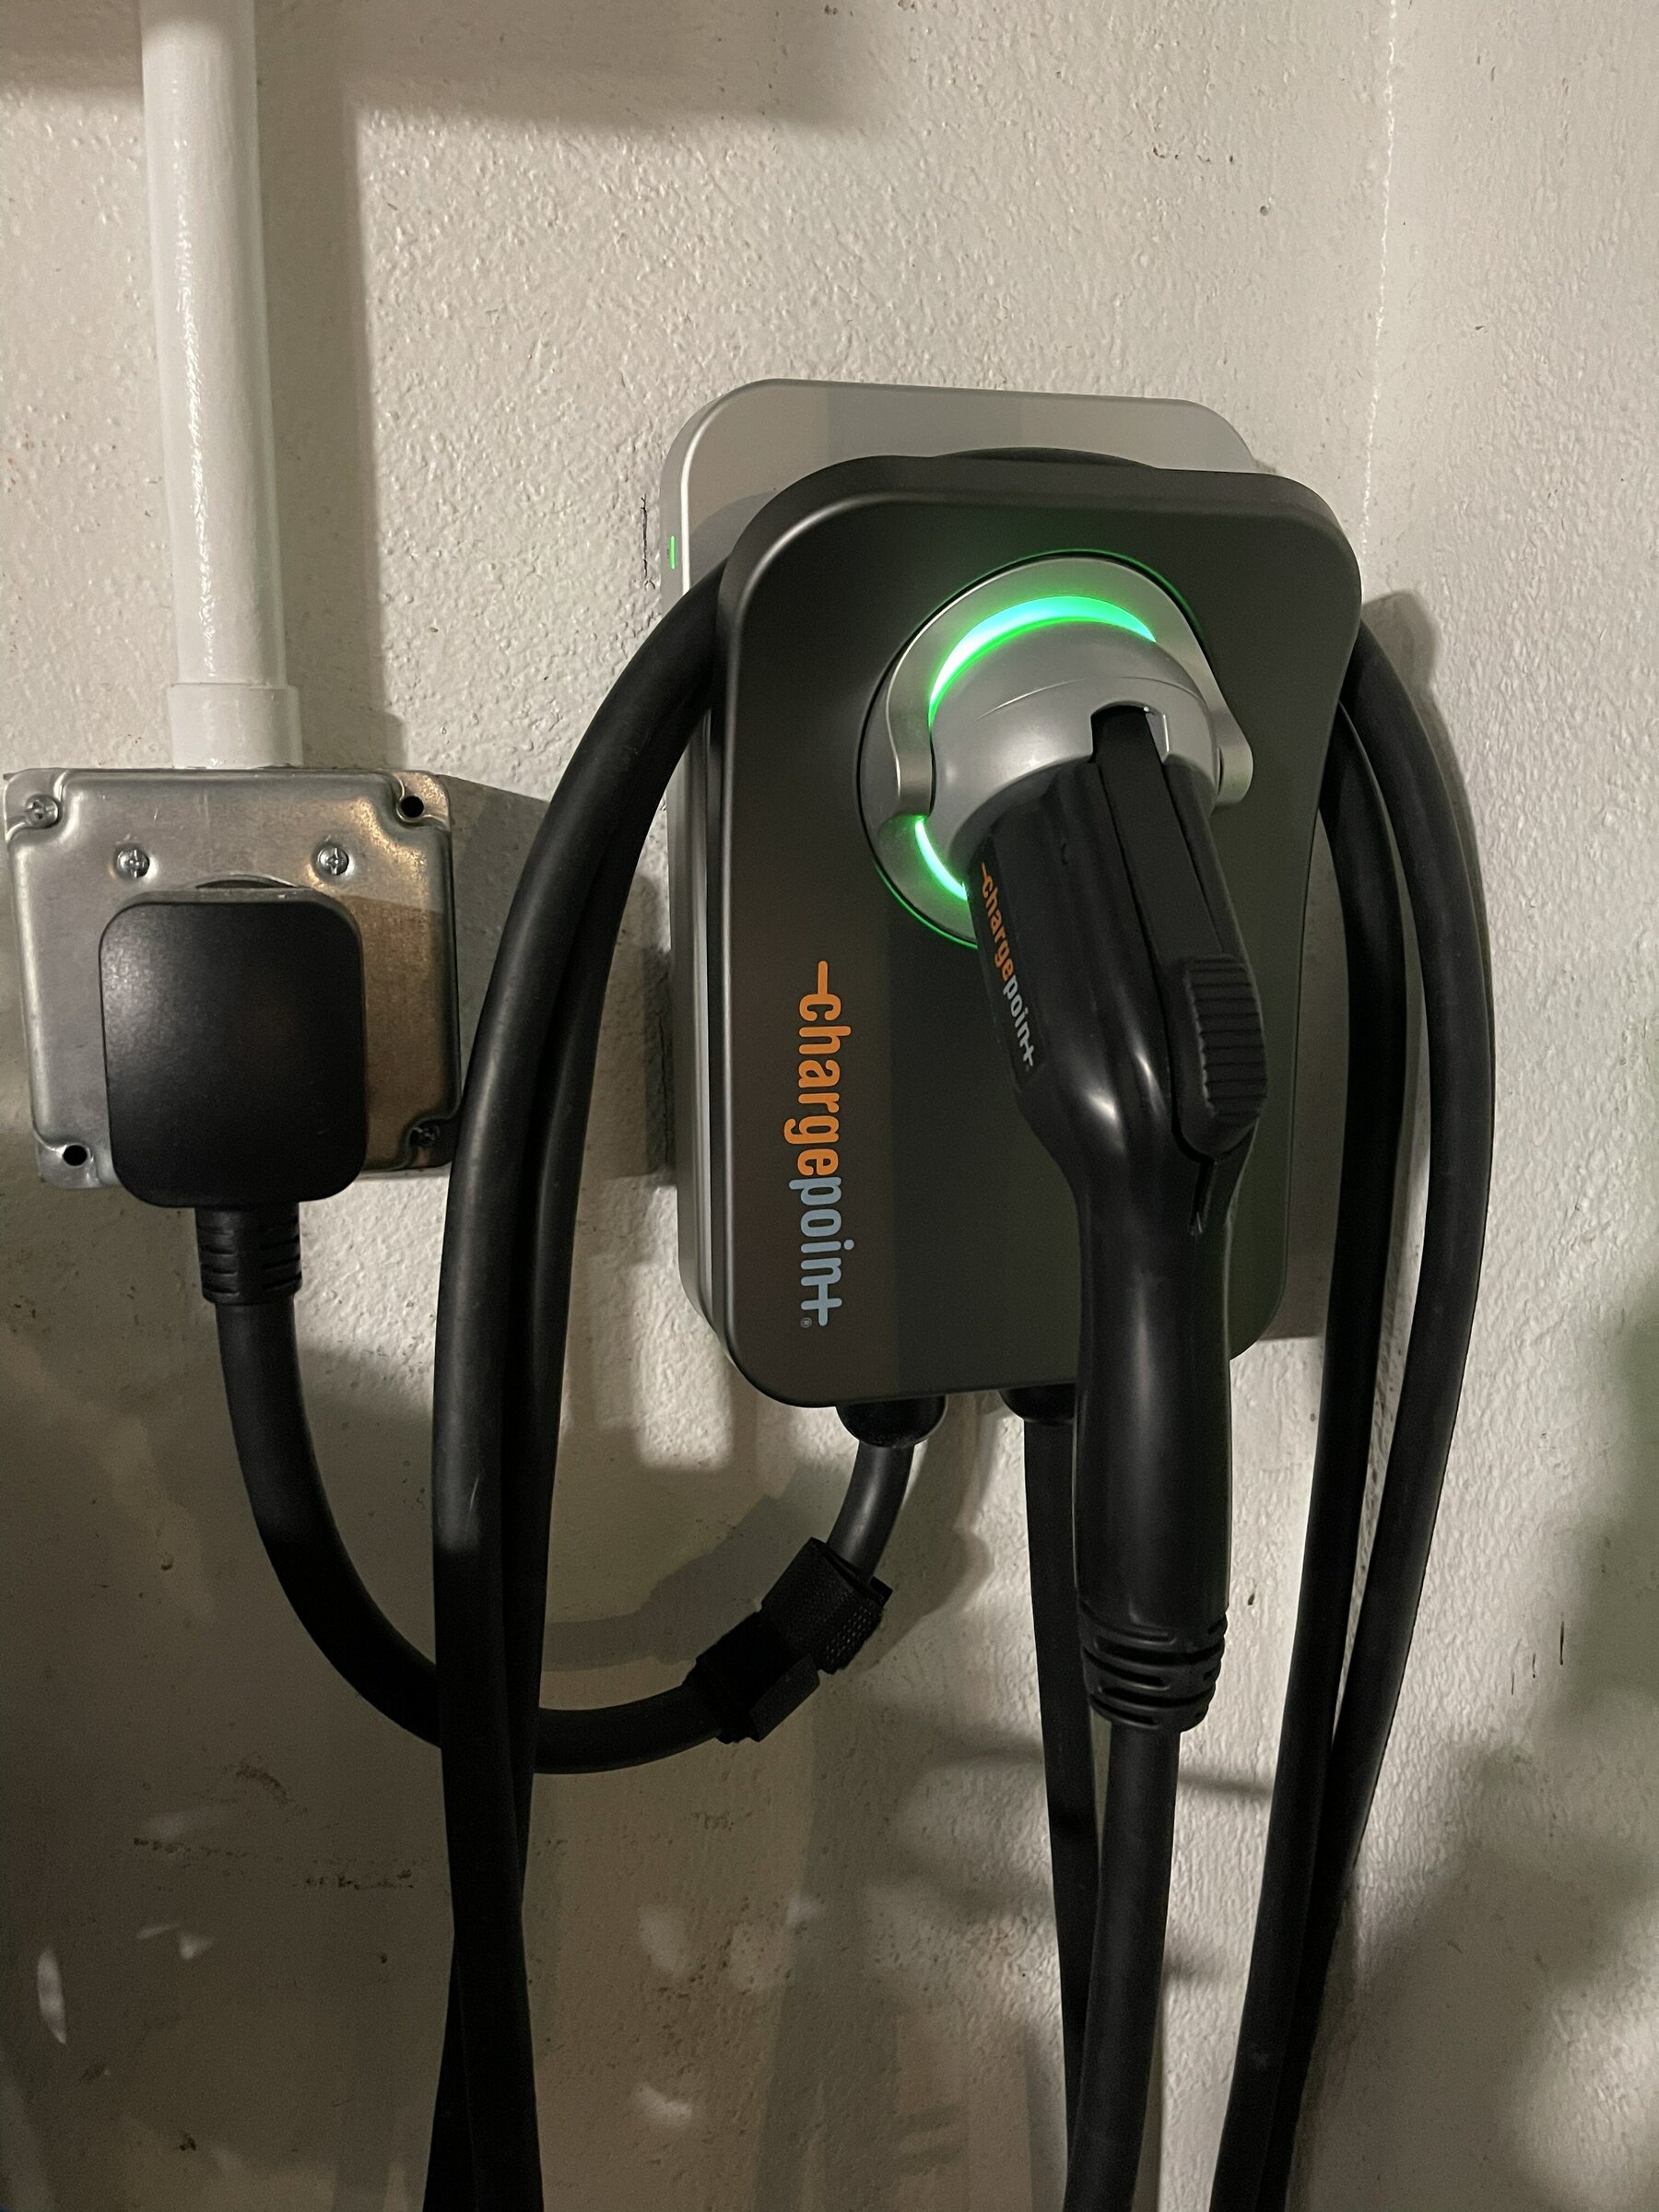 Porsche Taycan [US] - Over the Top - the well equipped EV home garage…for those that wish to "over do it"… ChargePoint